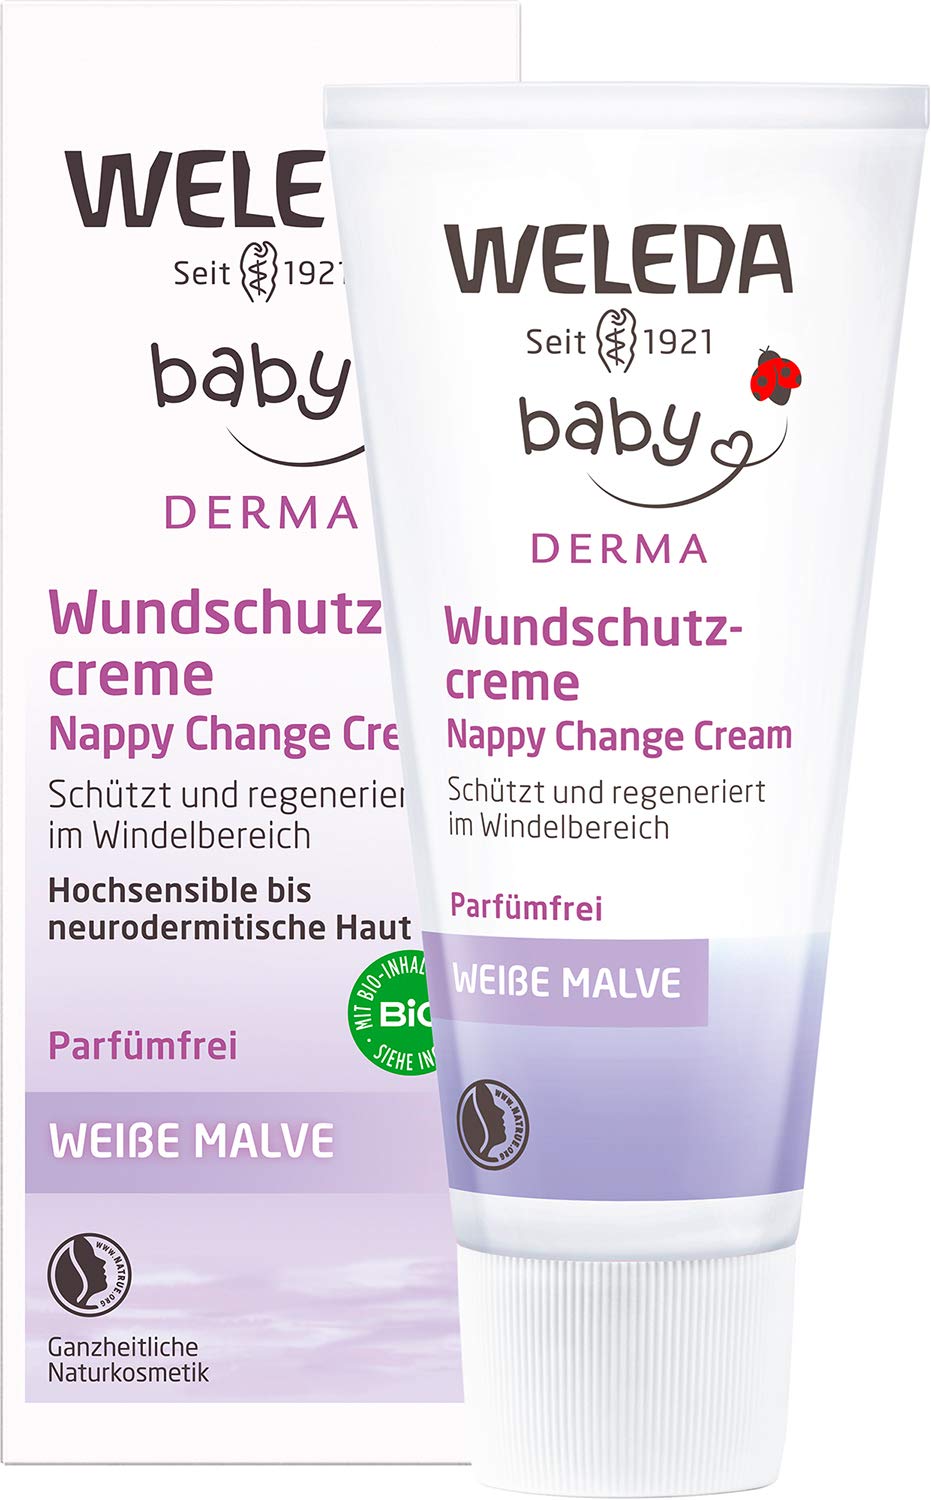 Weleda Weisse Malve Baby Cream Natural Cosmetics Skin Cream for the Protection and Regeneration of Irritated Baby Skin Healing Ointment for Nappy Care (1 x 50 ml), ‎white